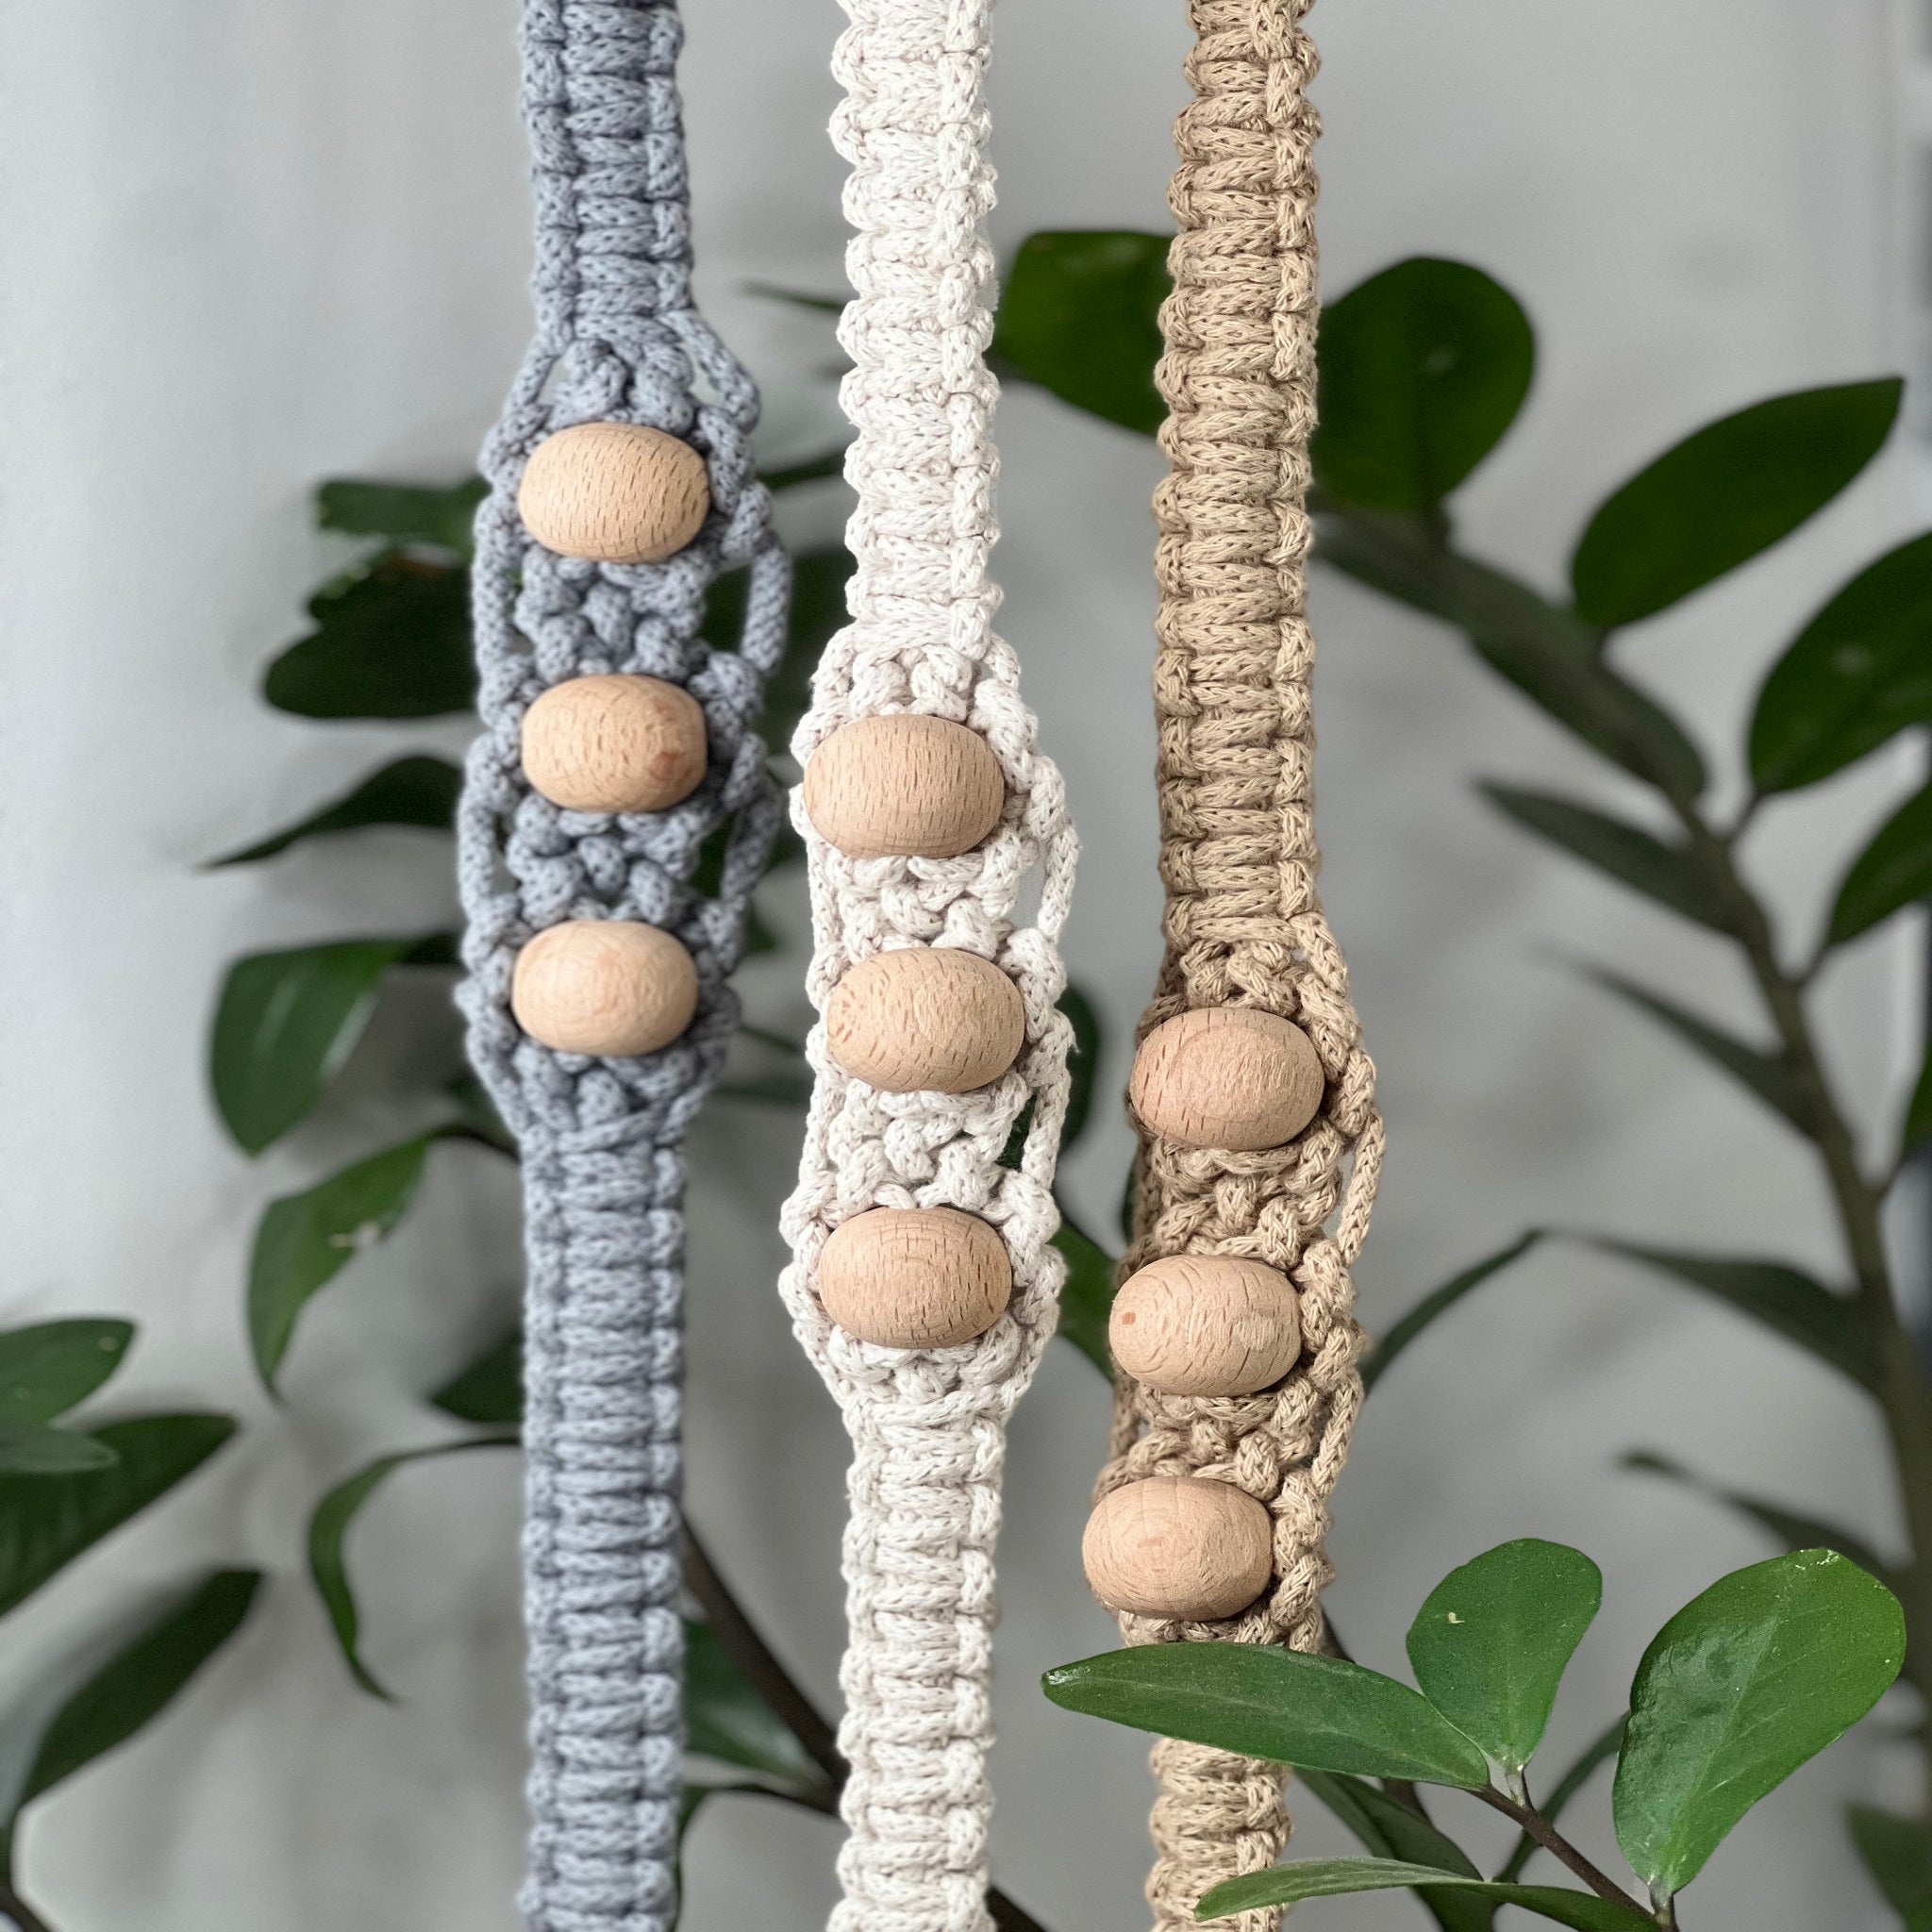 macrame yoga mat strap🧘🏼‍♀️ perfect gift for your yogi frend! only 1